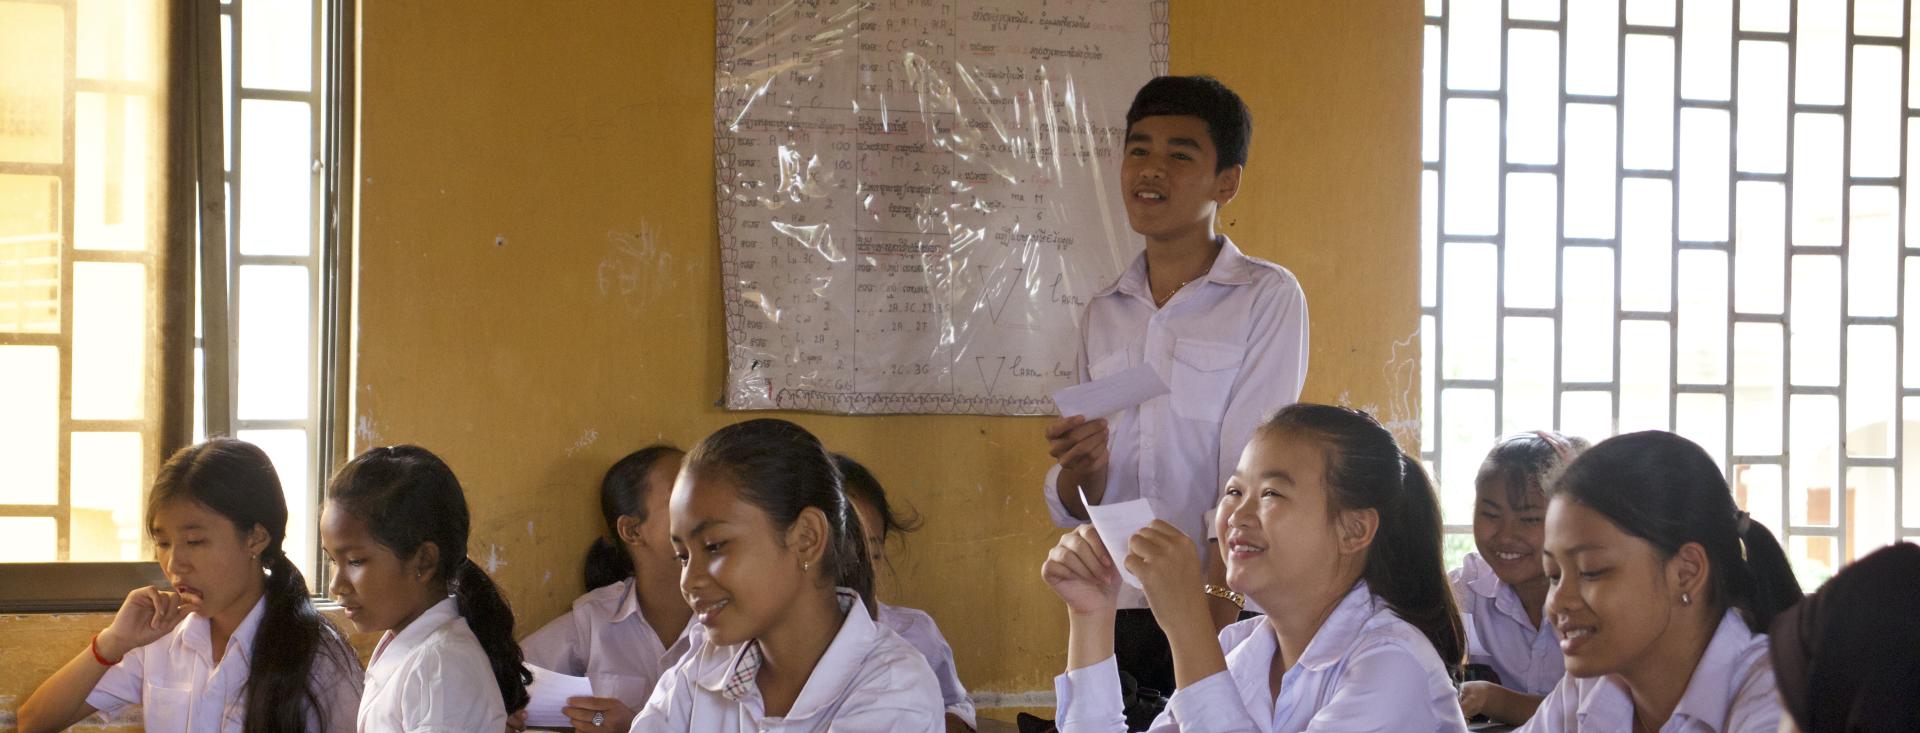 Students all wearing collared, long-sleeved shirts are sitting down at their desks in a classroom with large, open windows. They are smiling and reading from small paper cards.